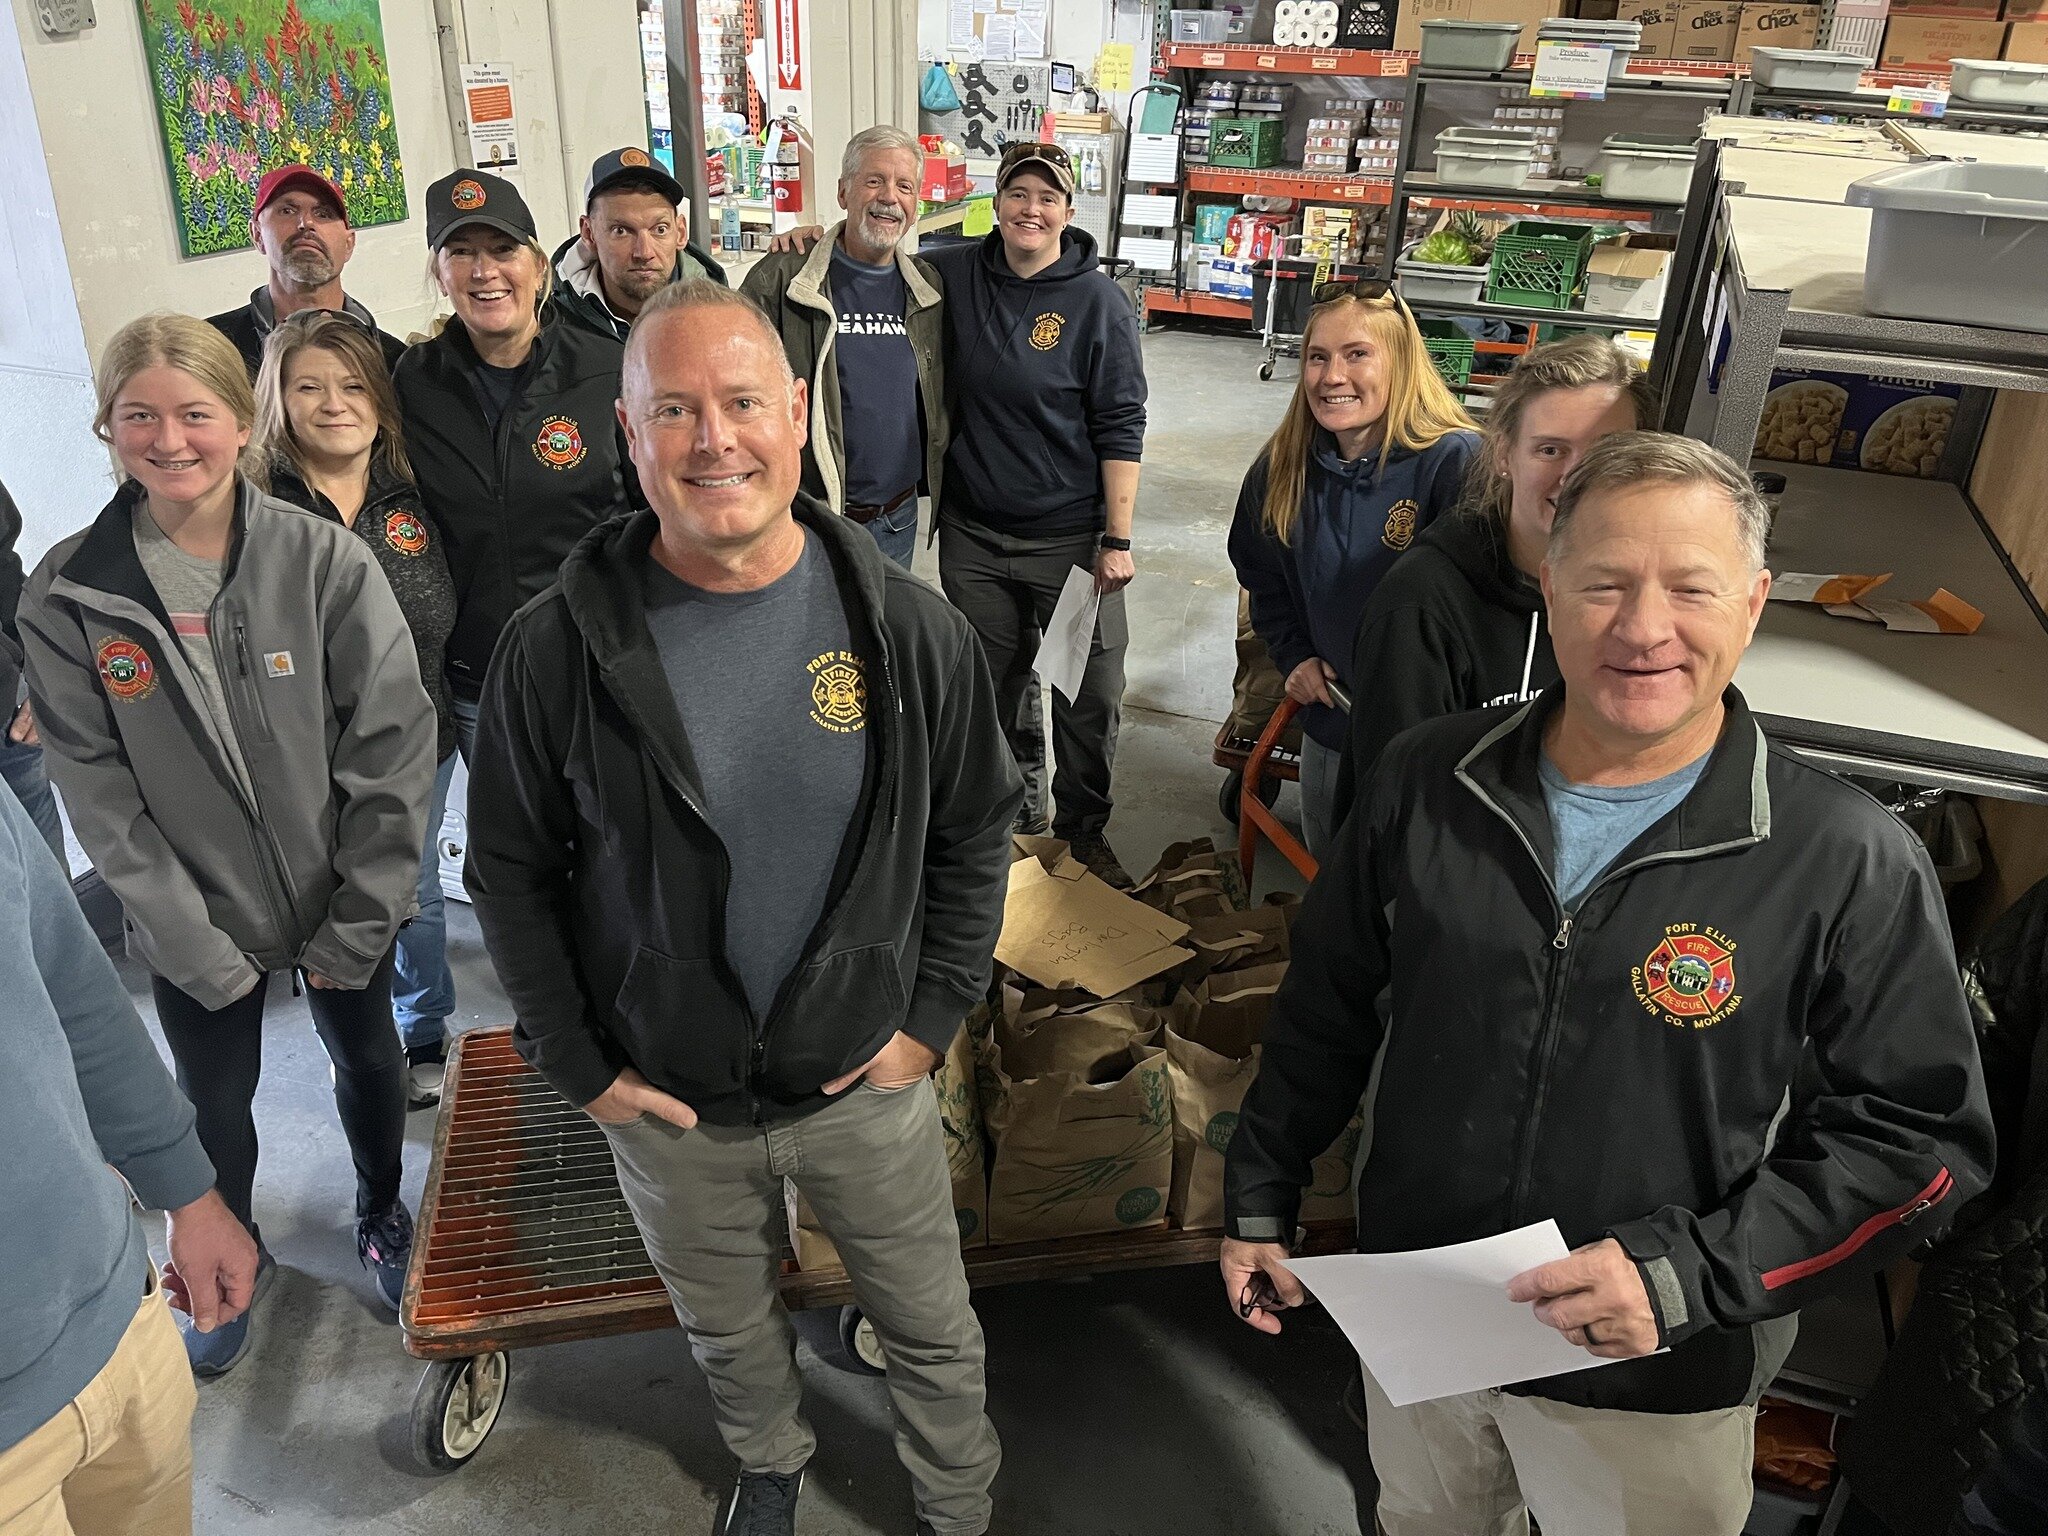 Fort Ellis Fire Department with friends / family responded to Gallatin Valley Food Bank's invitation to deliver Thanksgiving boxes on Sunday, November 19th to 68 households across Gallatin County who had signed up for home delivery service.
#Thanksgi